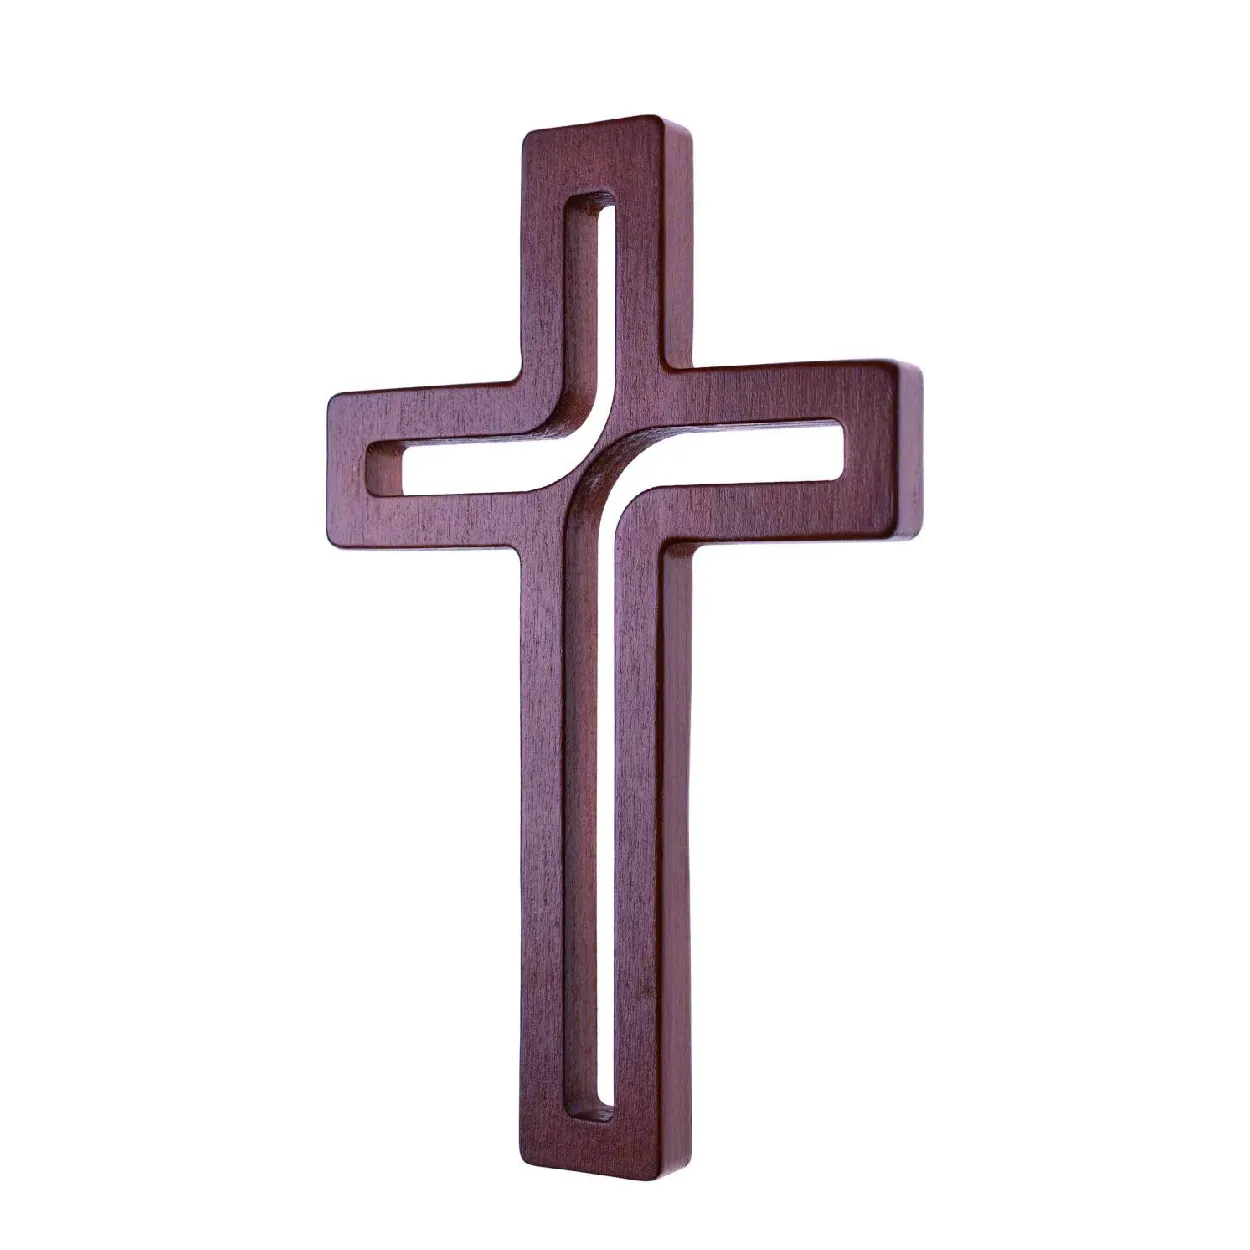 Home Accessories Decorative Ornaments Wood Wall Hanging Sign Plaque Wooden Cross